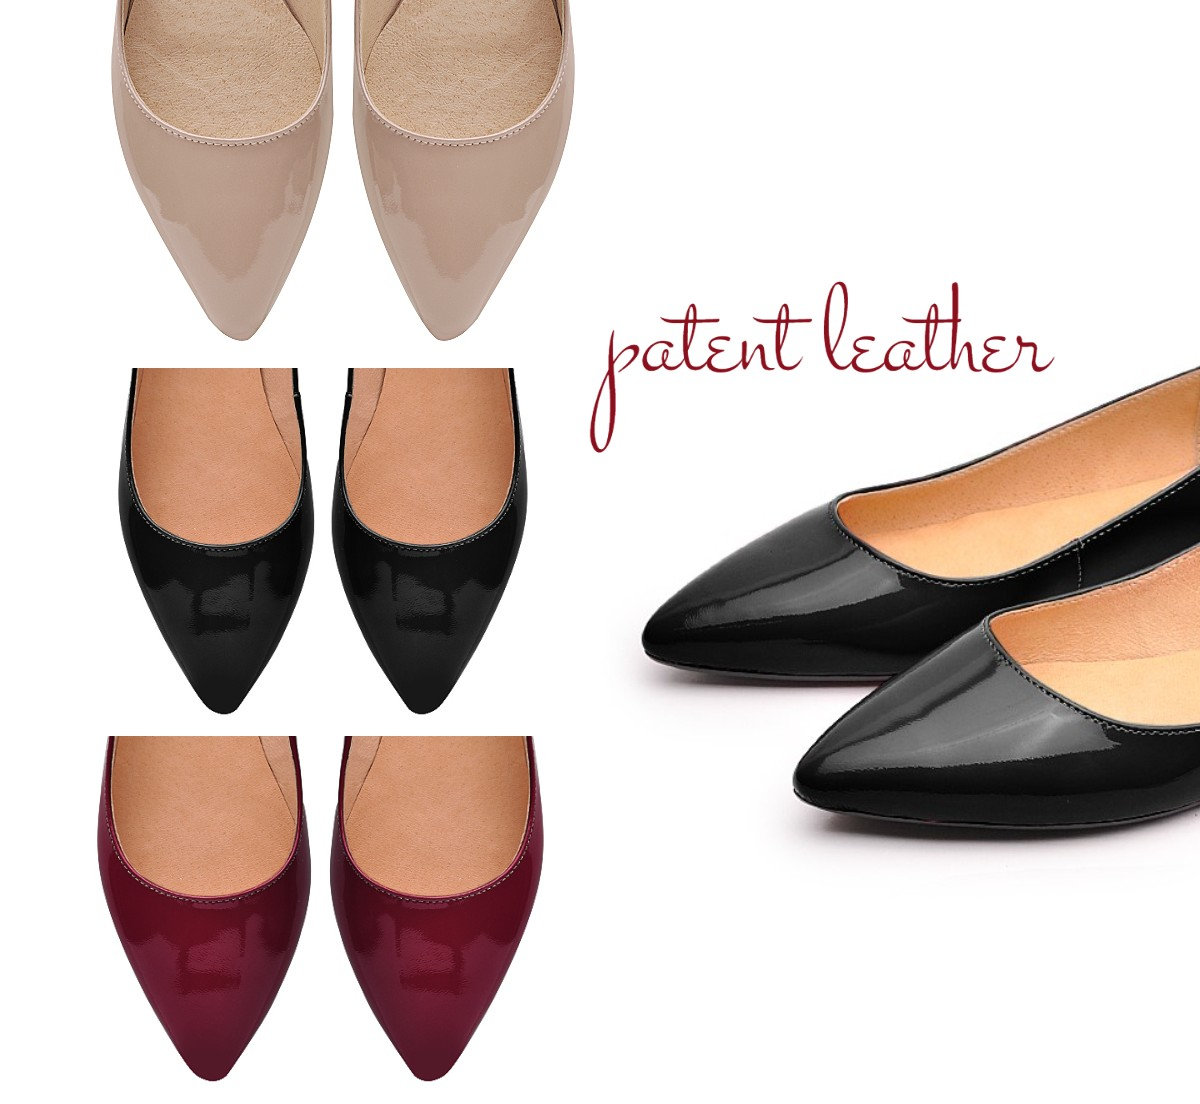 Buy Women Flat Shoes in trendy shades that belong to all parts of